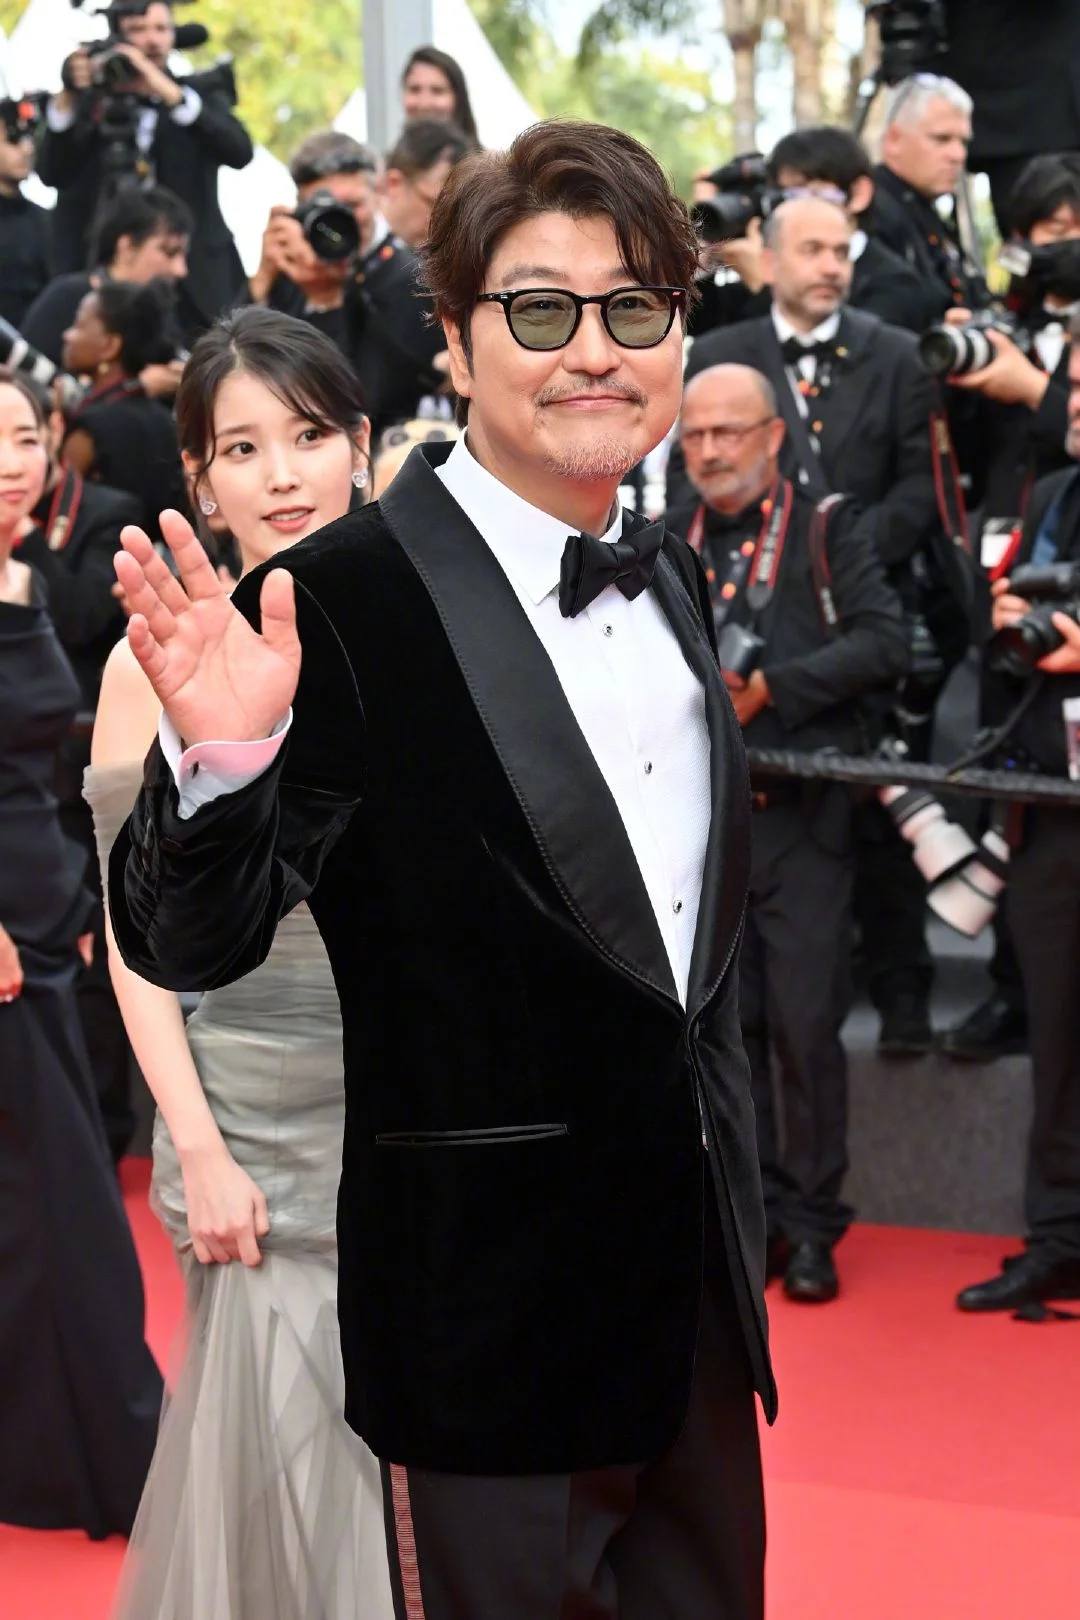 "Broker" crew appear on the red carpet at Cannes premiere